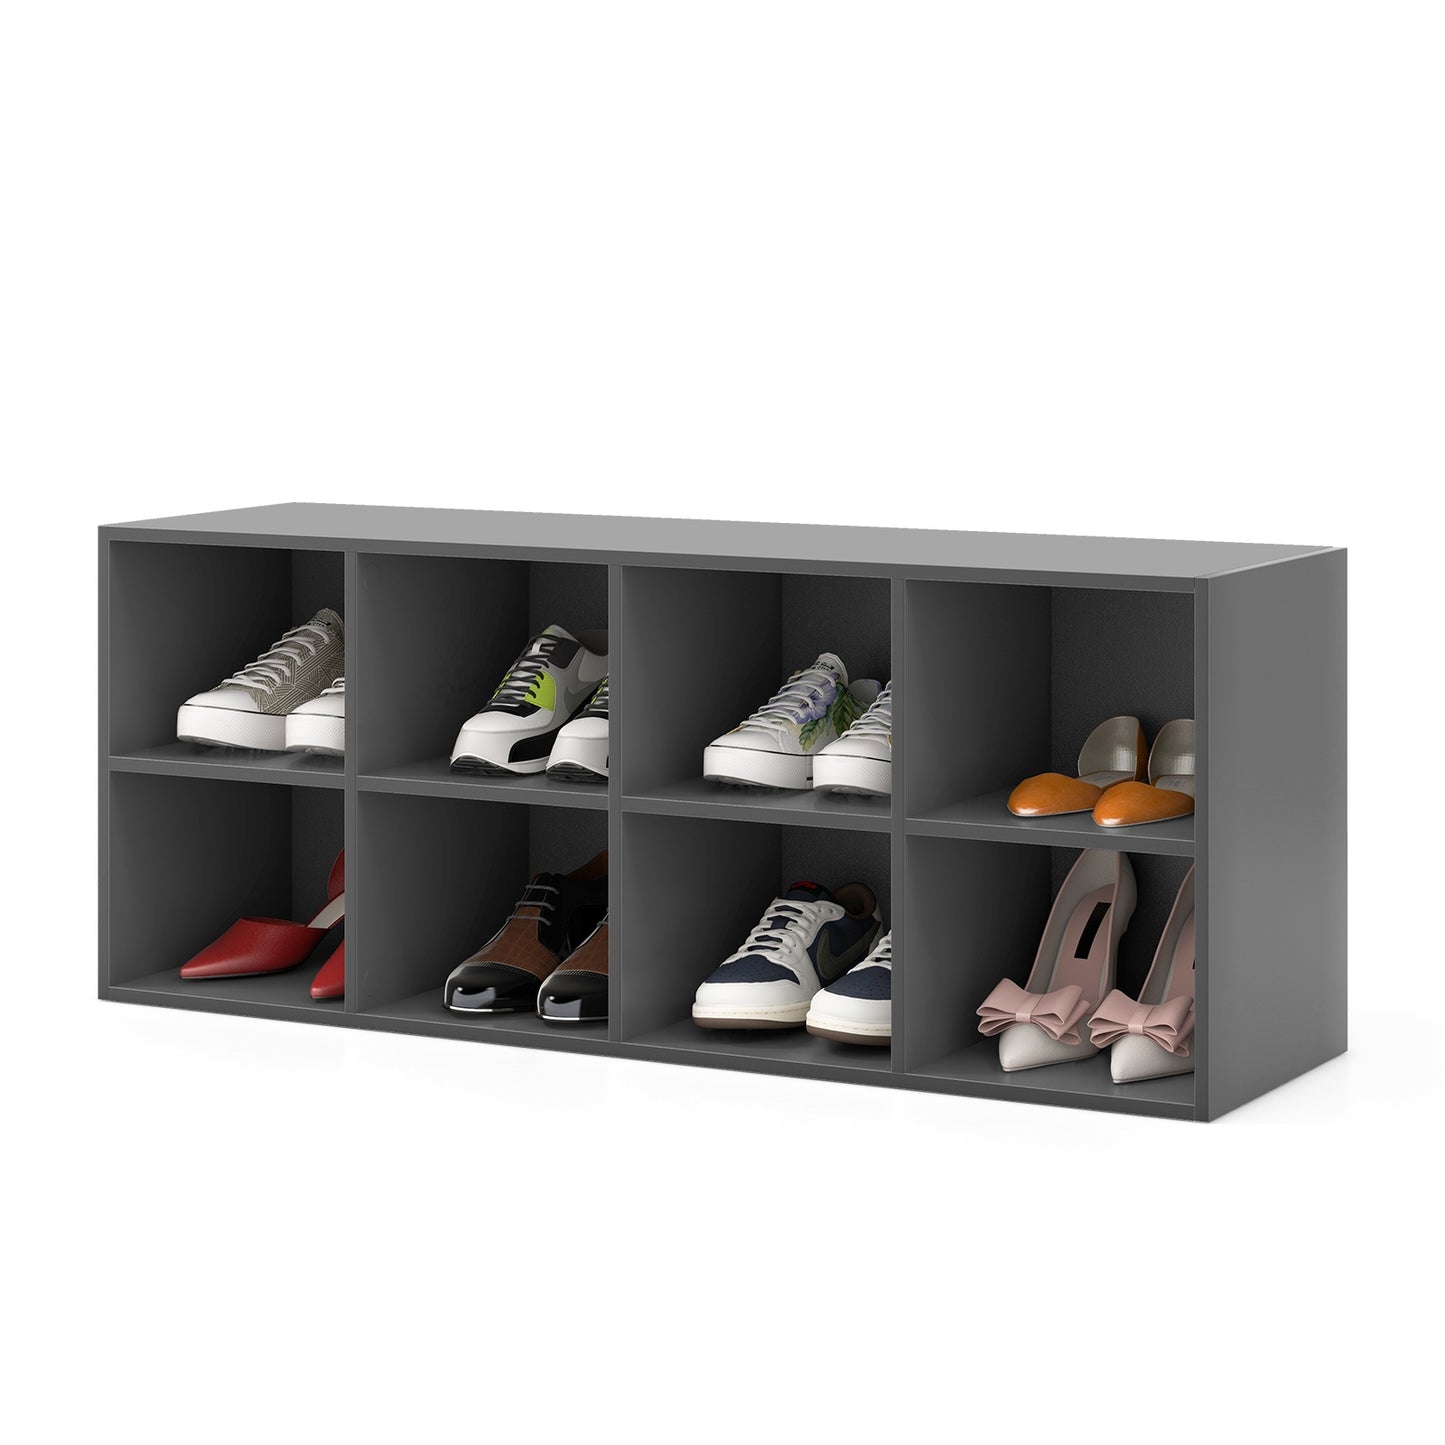 8 Cubbies Shoe Organizer with 500 LBS Weight Capacity-Gray